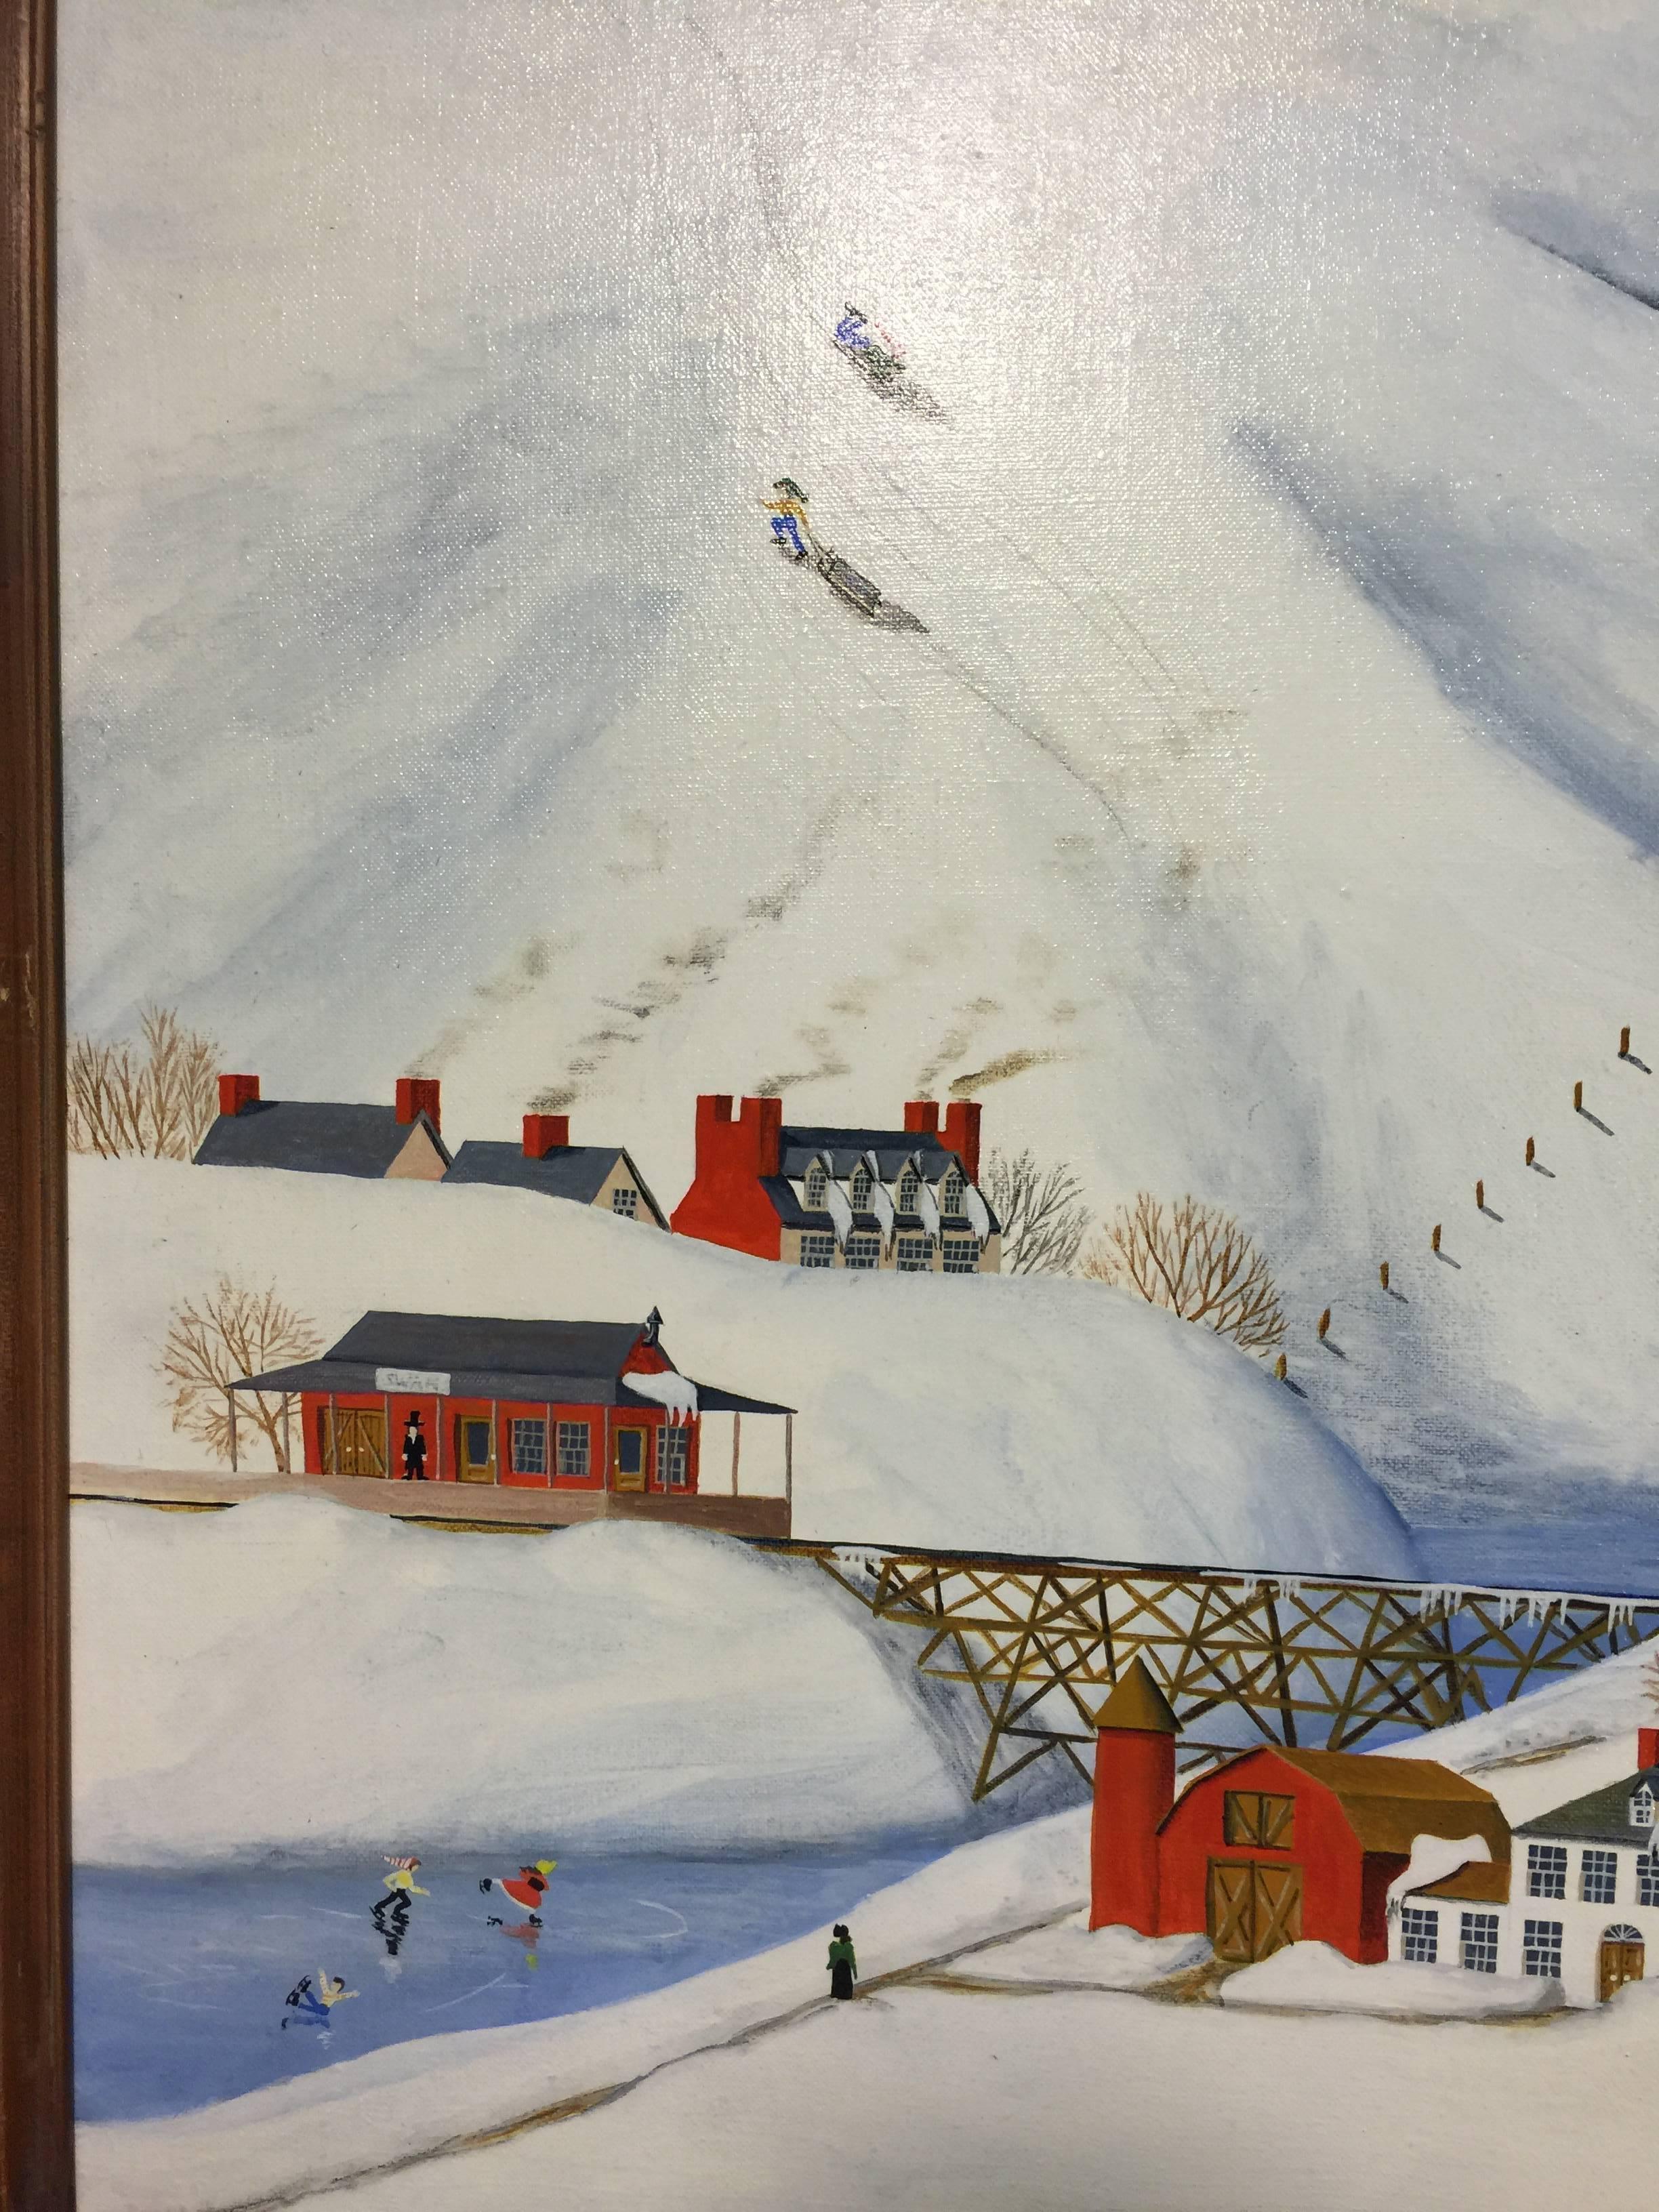 A beautiful Folk Art painting of a snow or winter scene by Louisiana artist Dewitt Jones Lobrano. Signed and dated 1979.